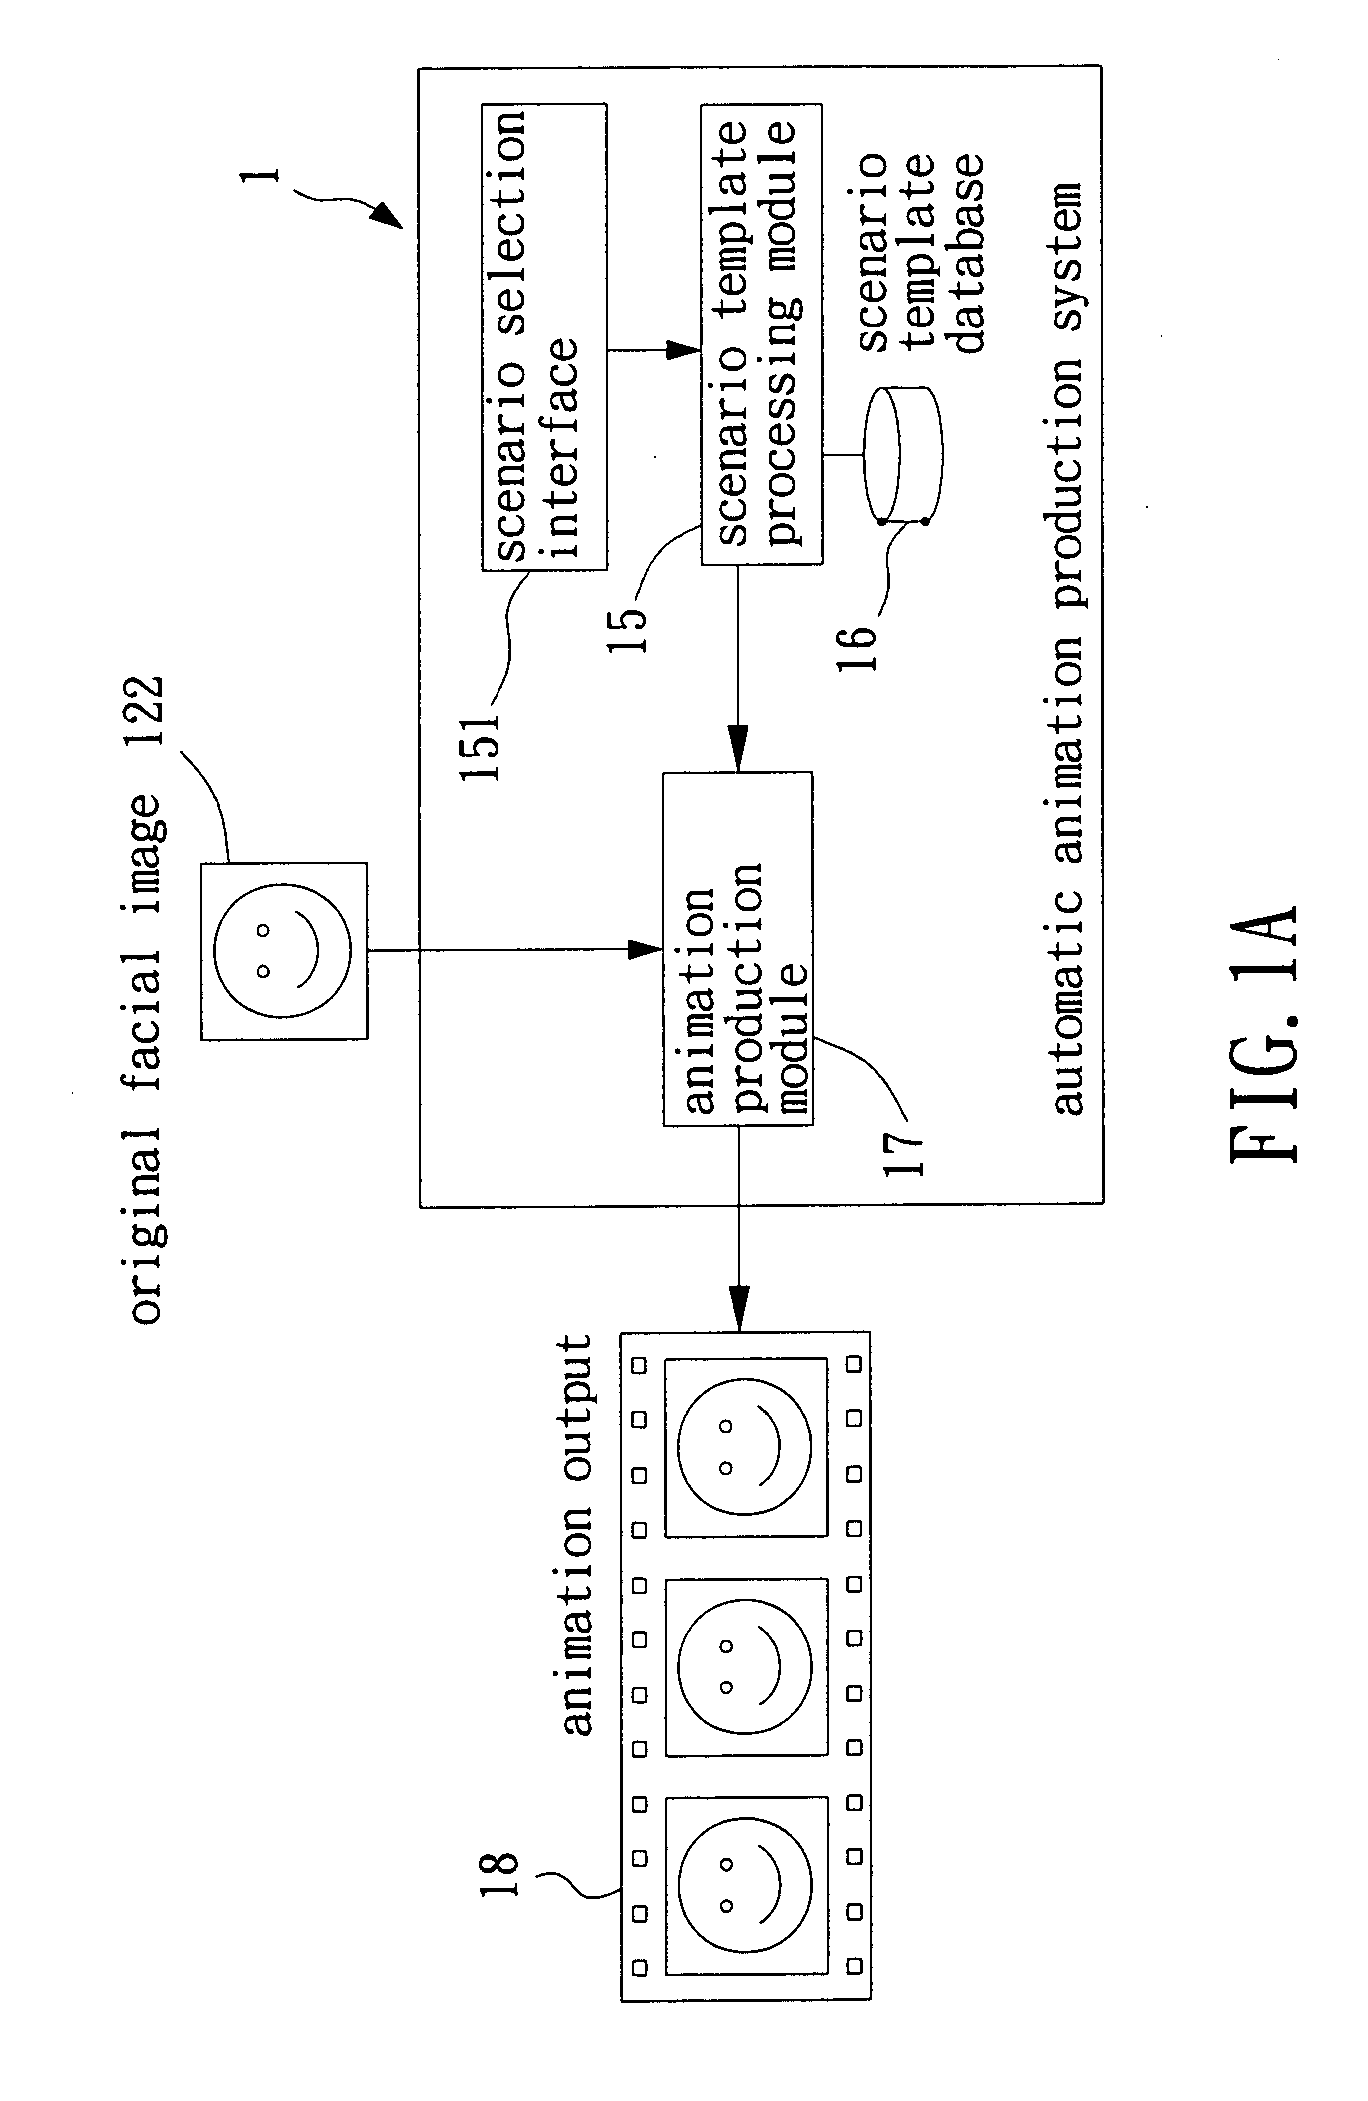 Automatic animation production system and method